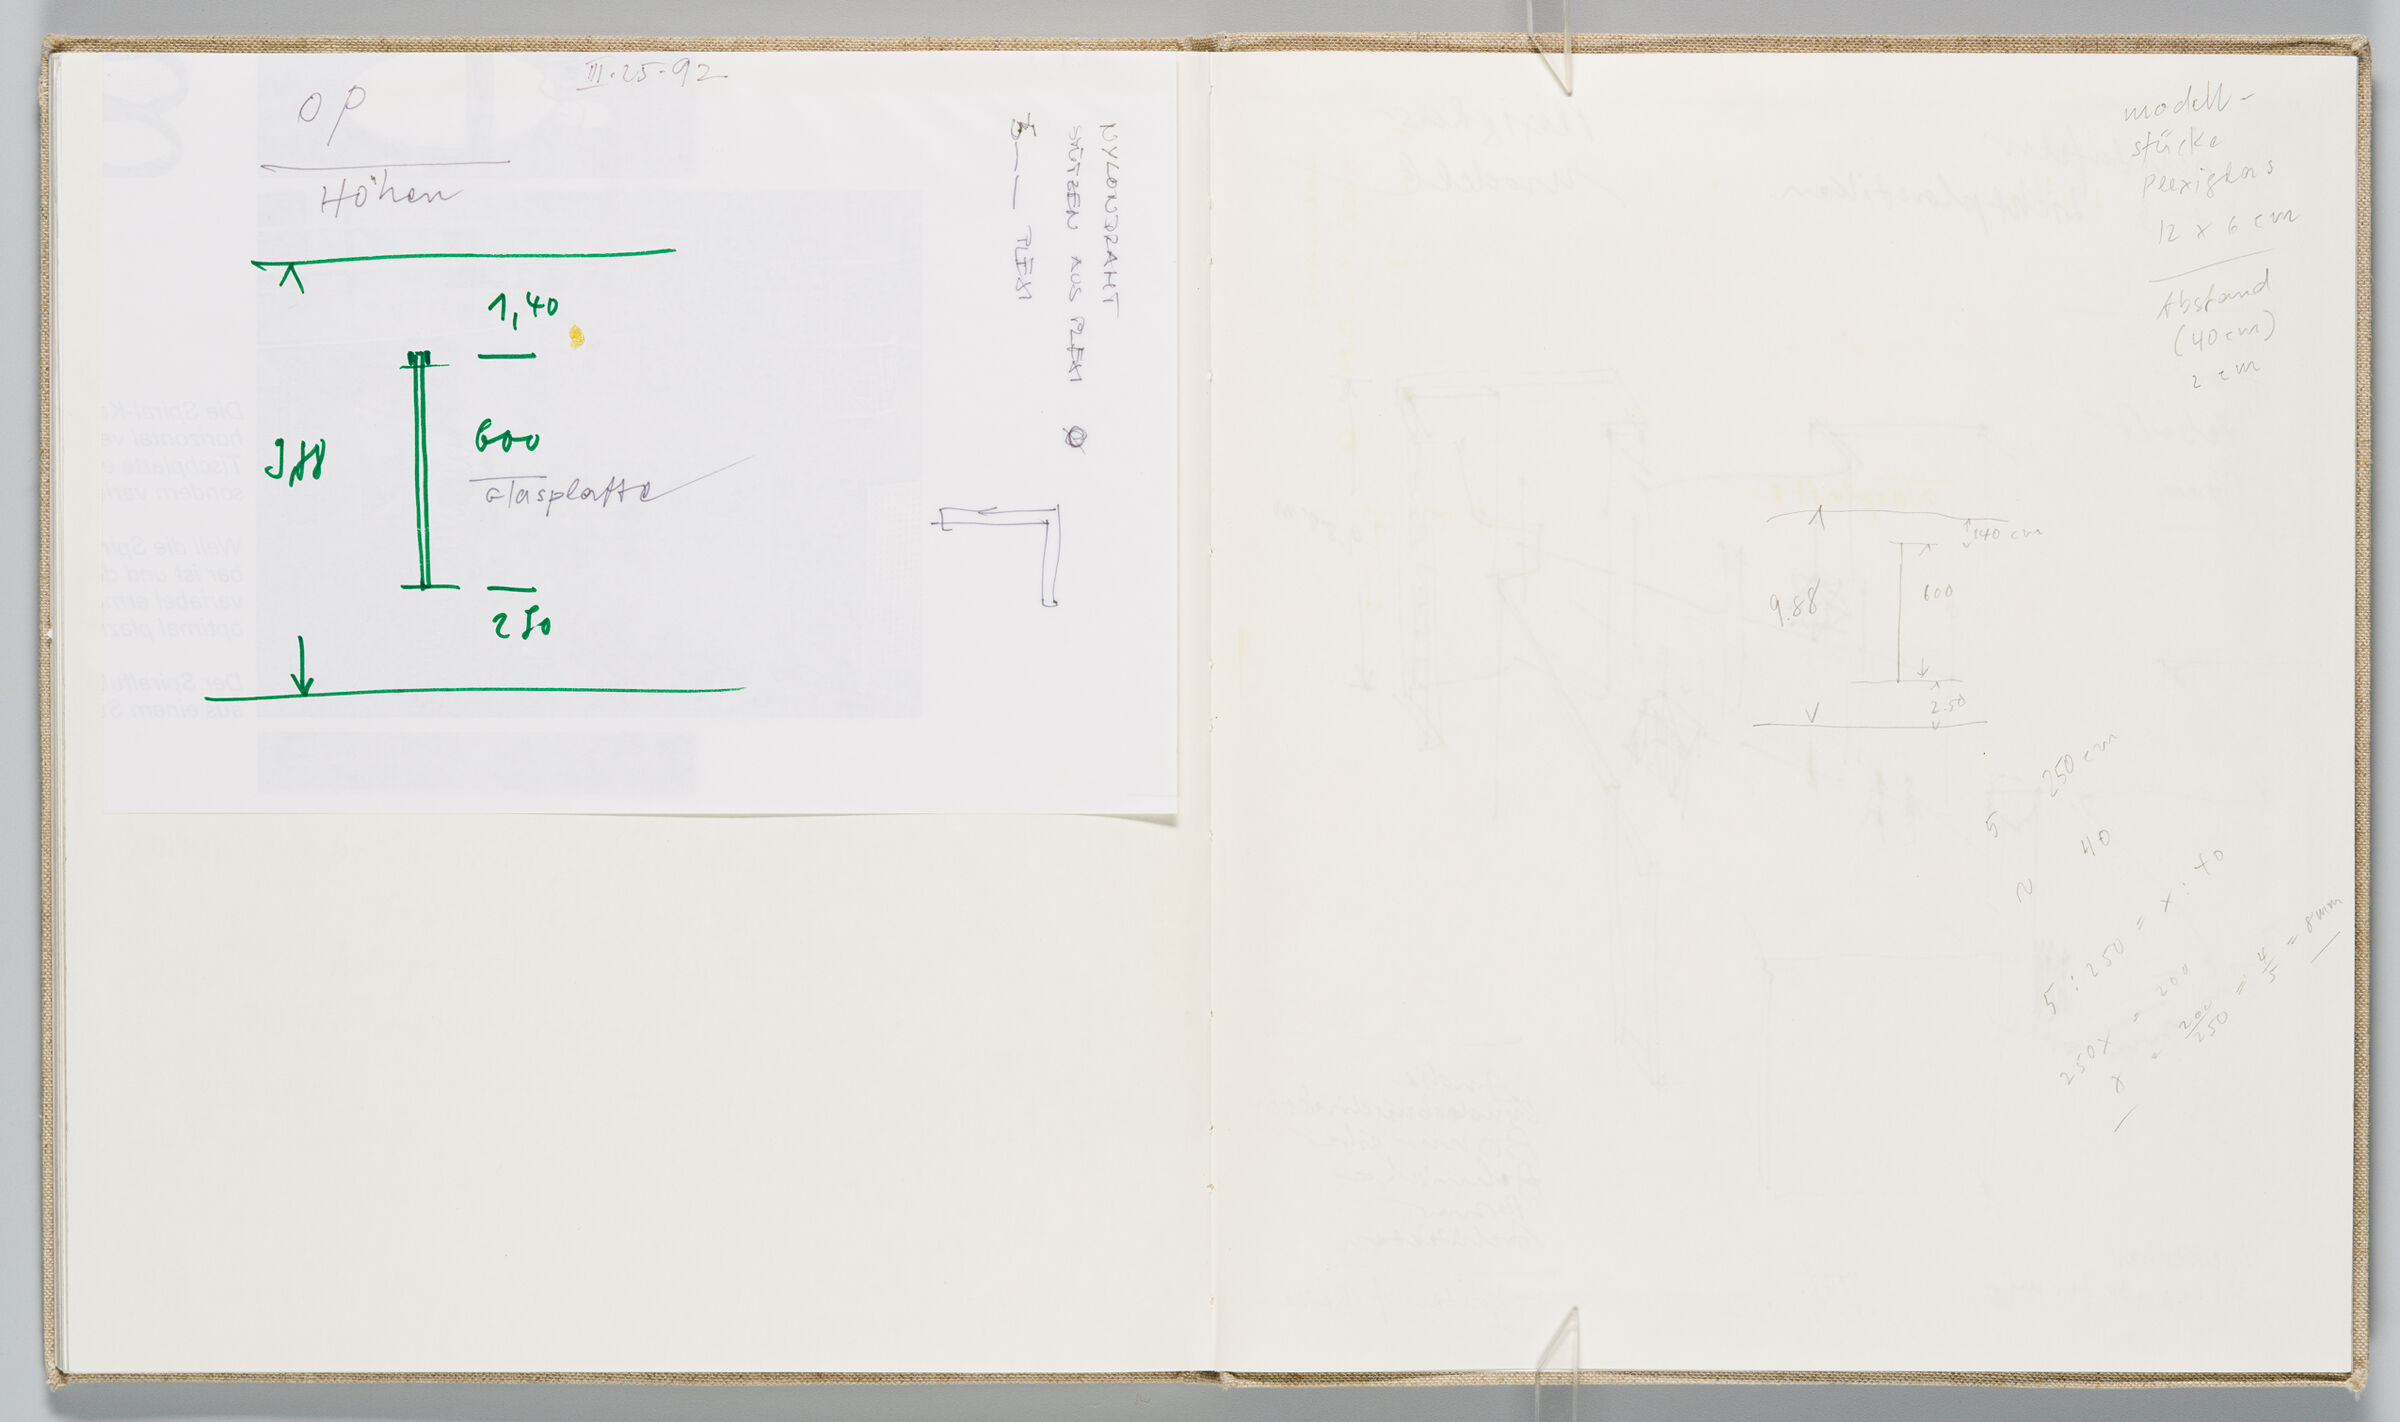 Untitled (Adhered Note With Measurements, Left Page); Untitled (Measurements And Calculations, Right Page)